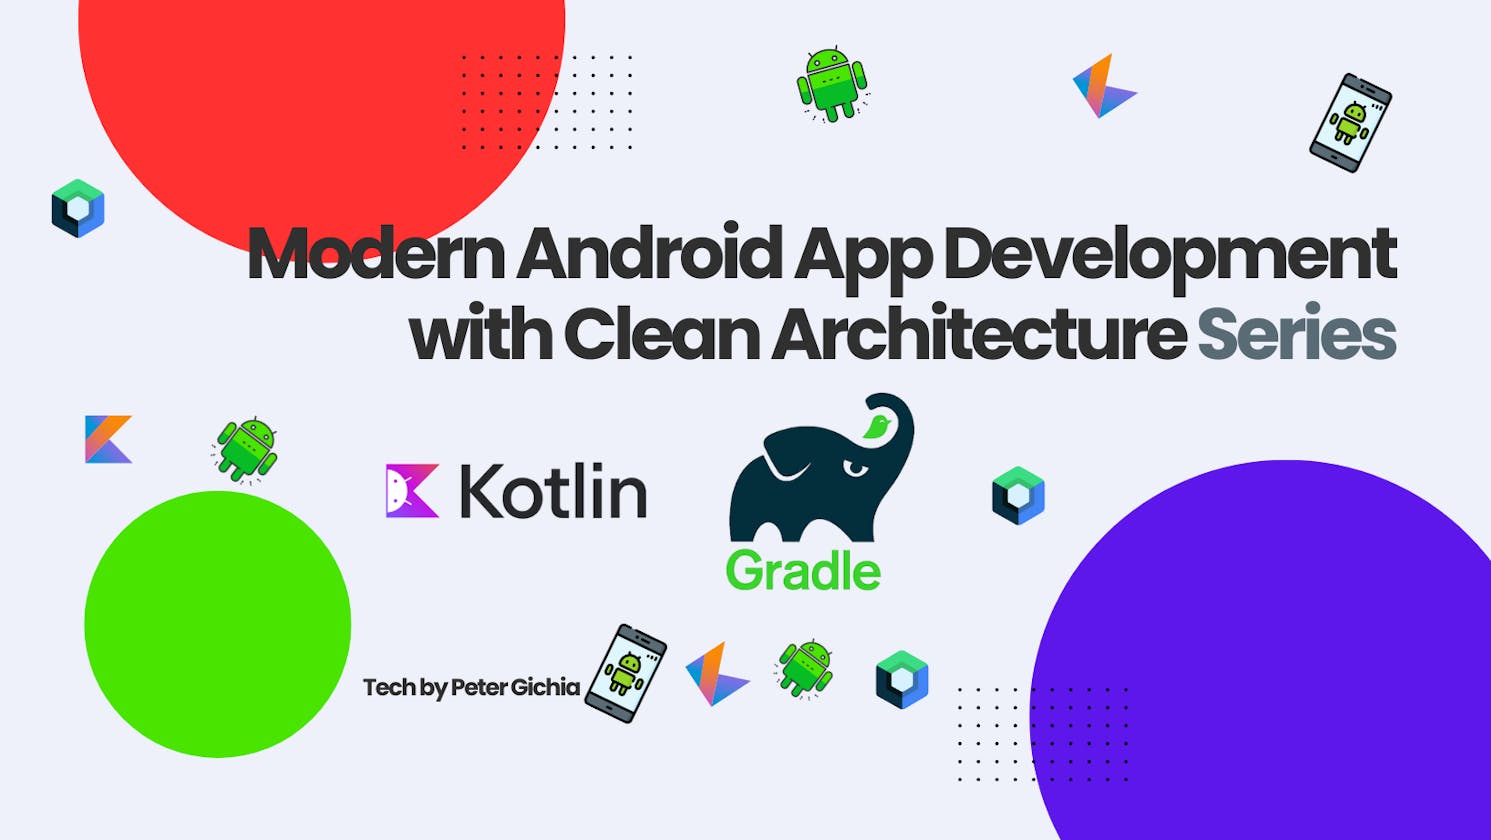 Modern Android App Development with Clean Architecture Series